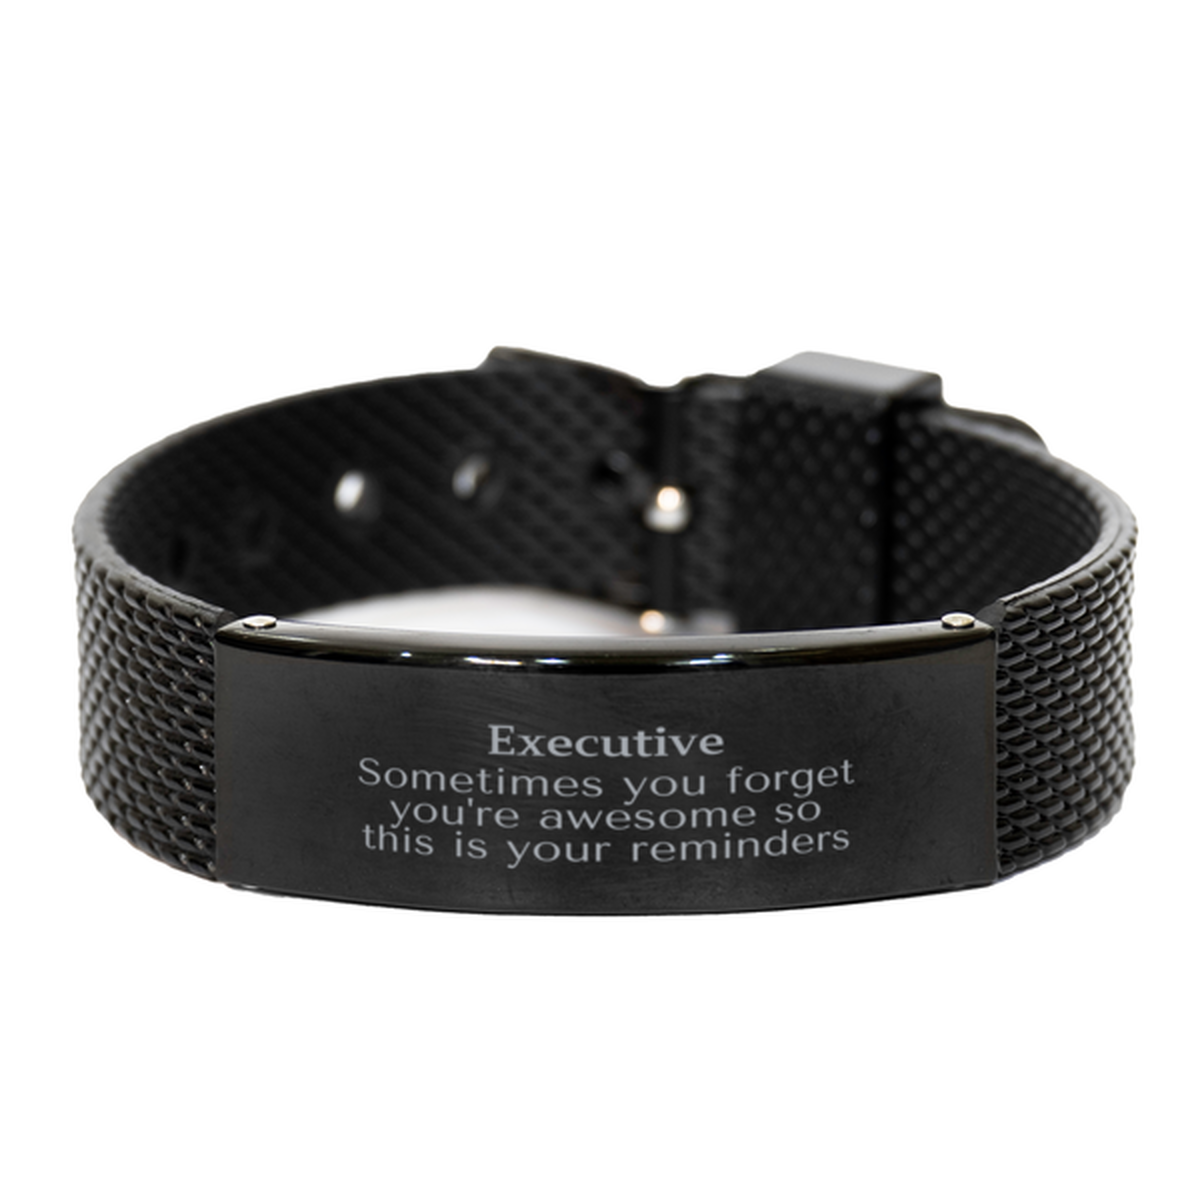 Sentimental Executive Black Shark Mesh Bracelet, Executive Sometimes you forget you're awesome so this is your reminders, Graduation Christmas Birthday Gifts for Executive, Men, Women, Coworkers